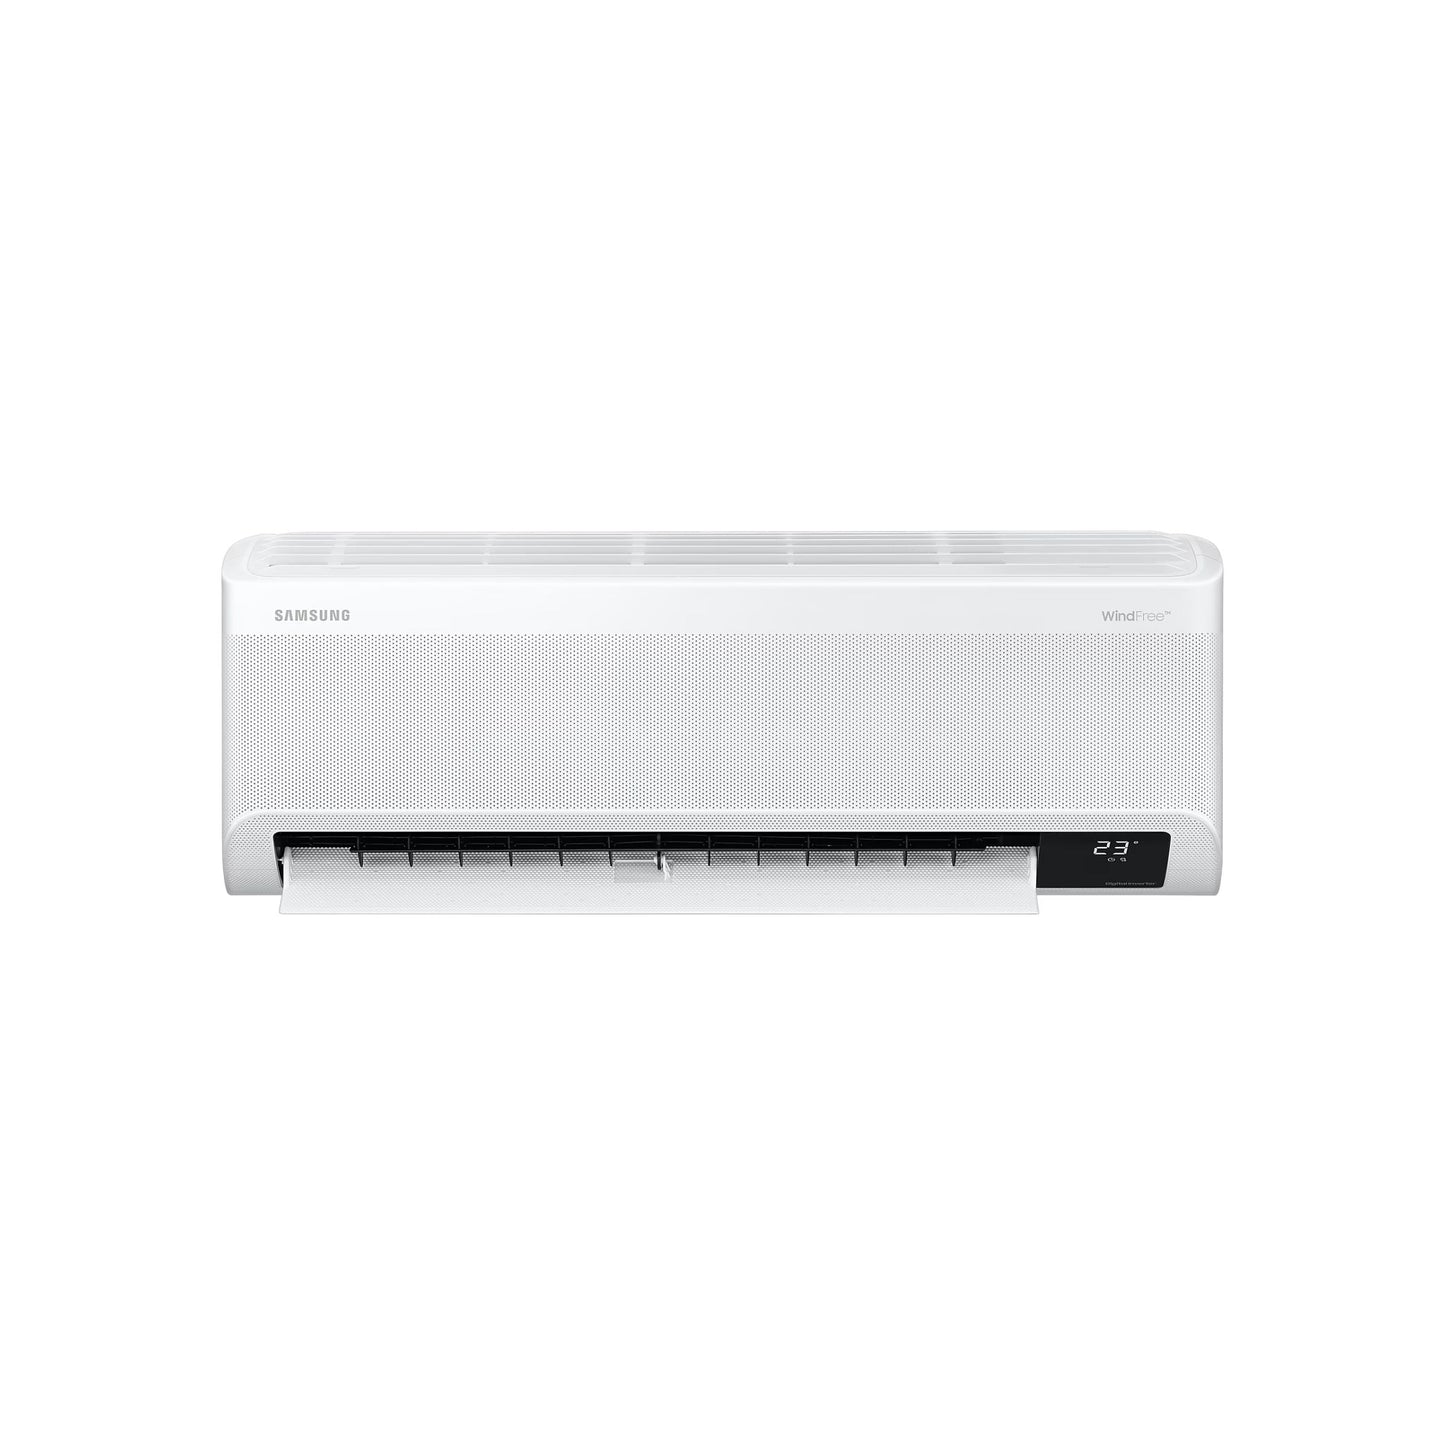 Samsung Convertible 5in1 1.5 T 3 Star Air Conditioner Indoor Unit